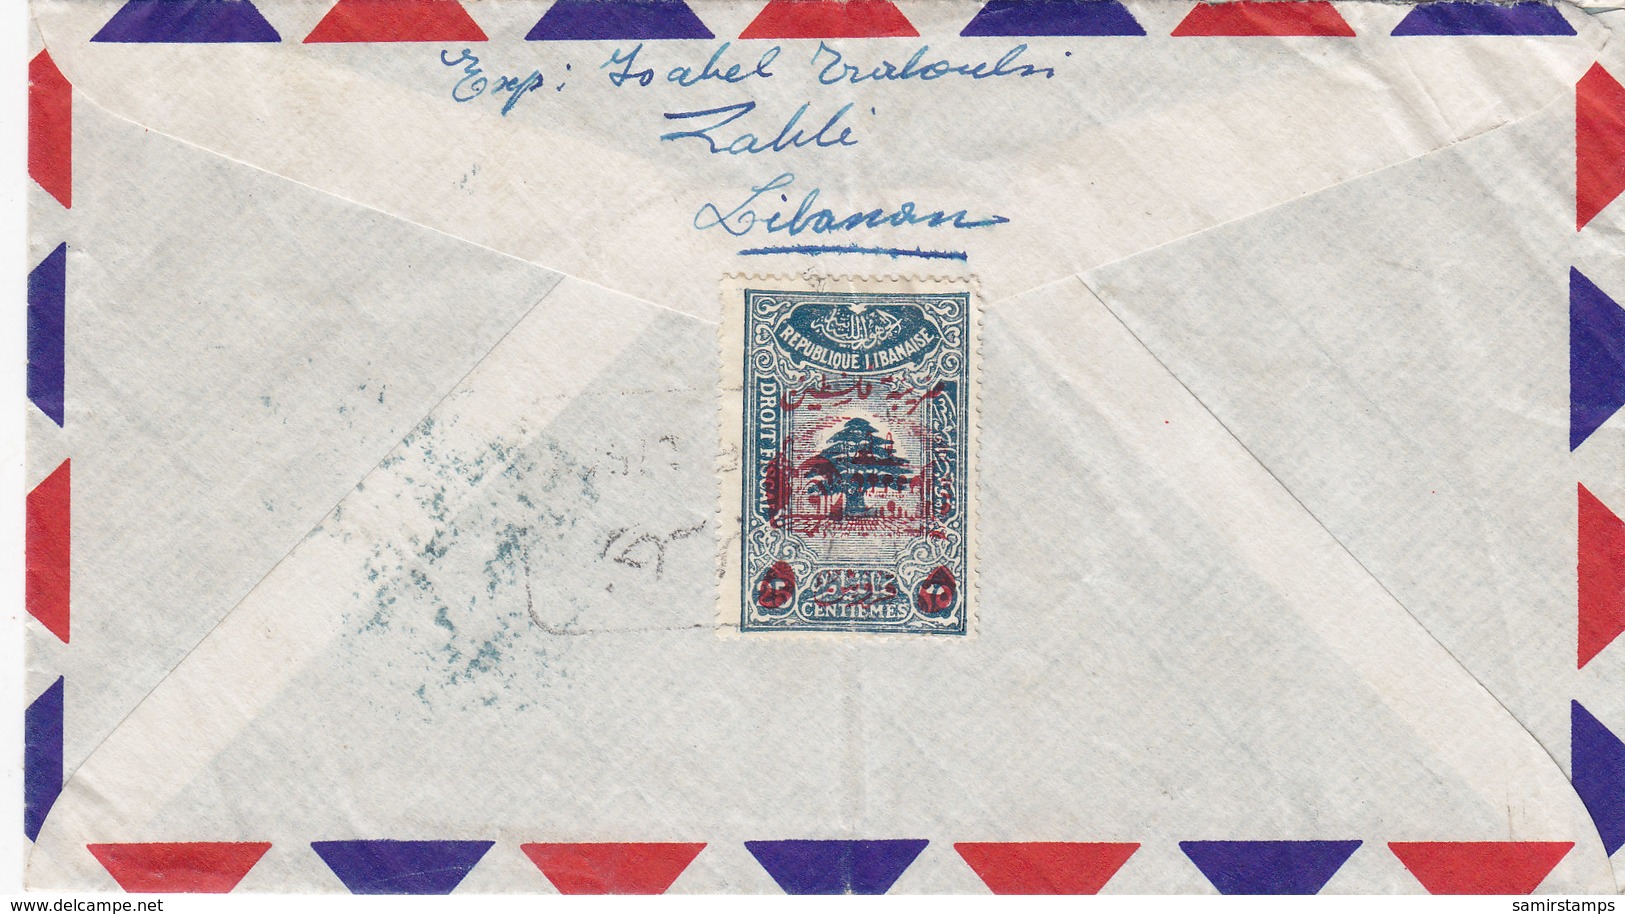 Lebanon-Liban Commercial Cover Zahle 1949,franked High Valuen 100 PL Heron,fine Condit- Red. Price- SKRILL ONLY - Liban